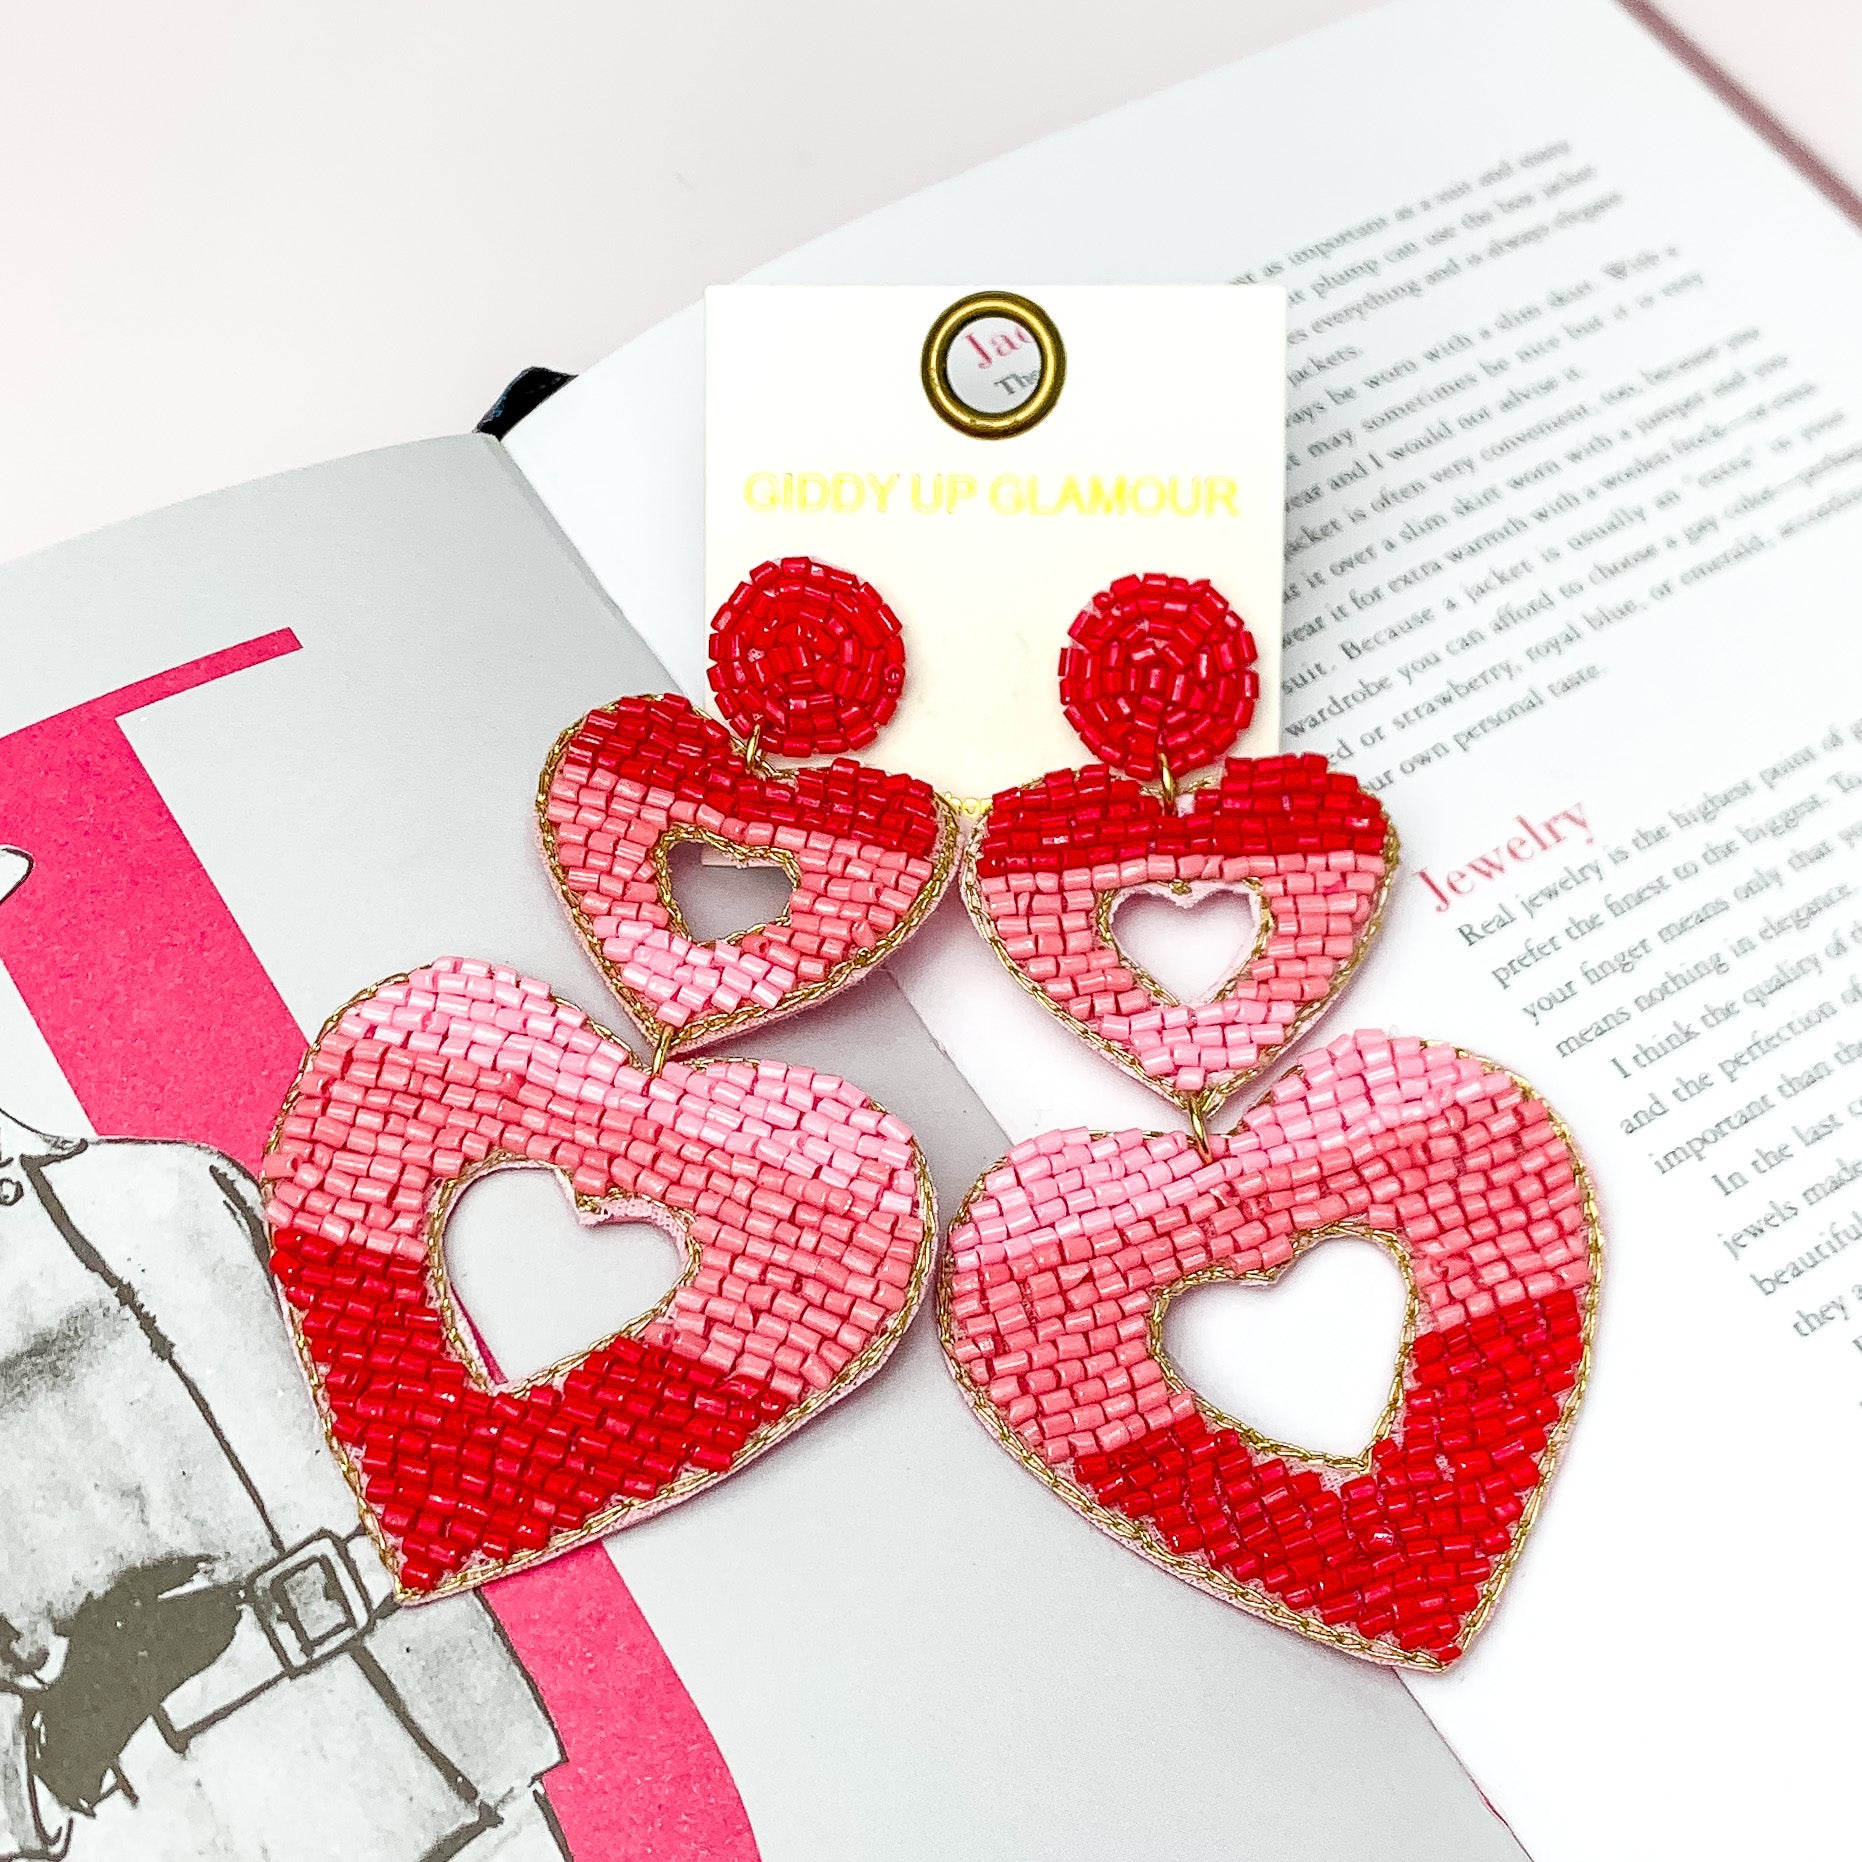 Beaded Two Tier Open Heart Earrings in Red, and Pink. Pictured on a white background with a book behind the earrings.